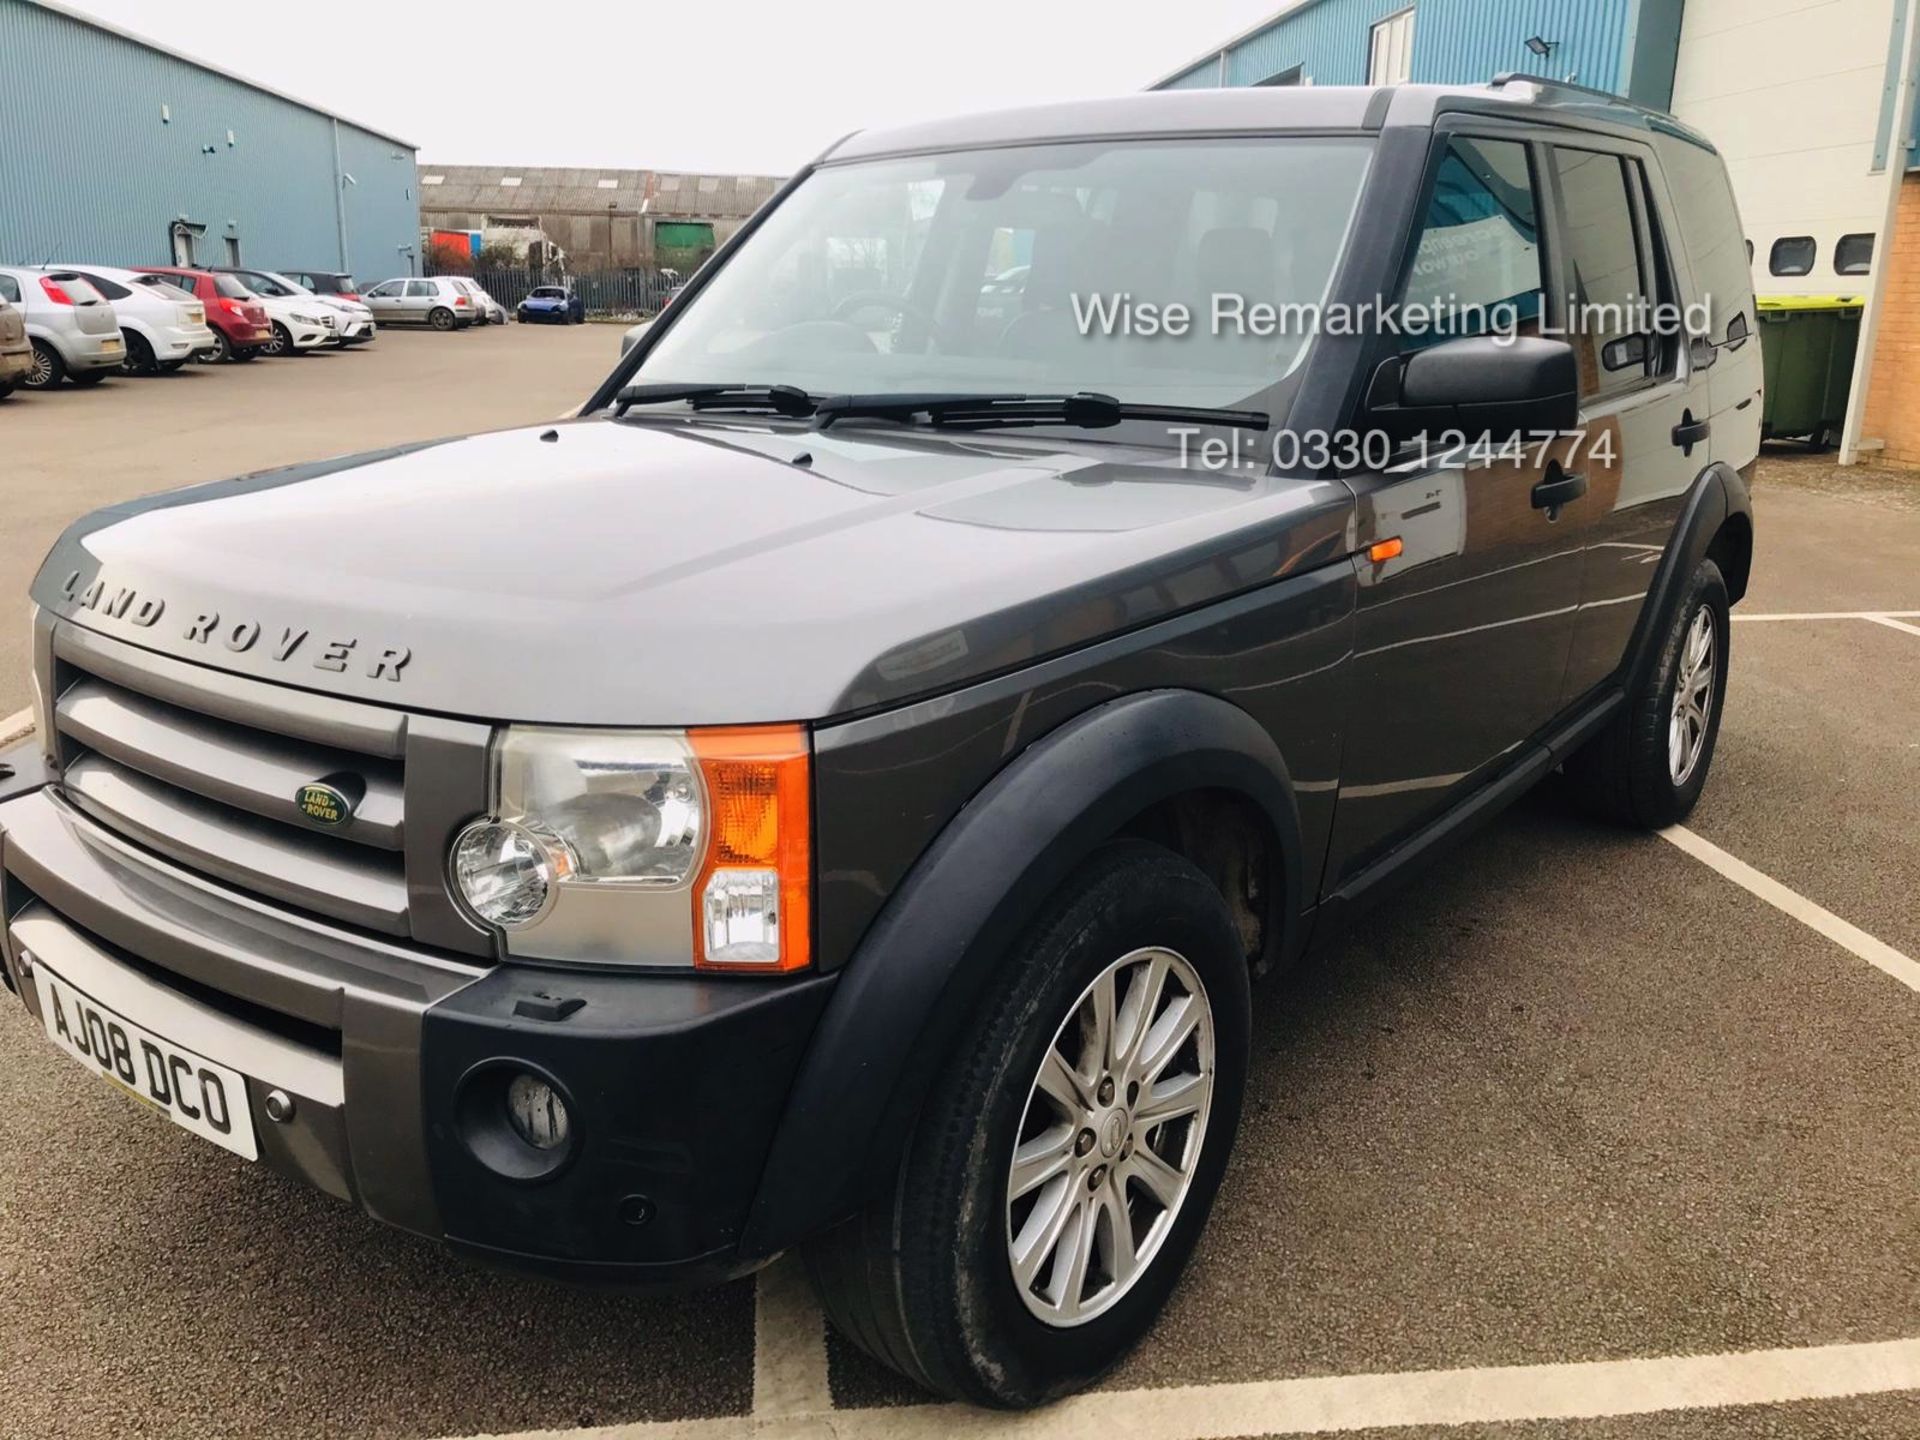 Land Rover Discovery SE 2.7 TDV6 Automatic - 2008 08 Reg - 7 seats - 1 Keeper - Service History - Image 3 of 22